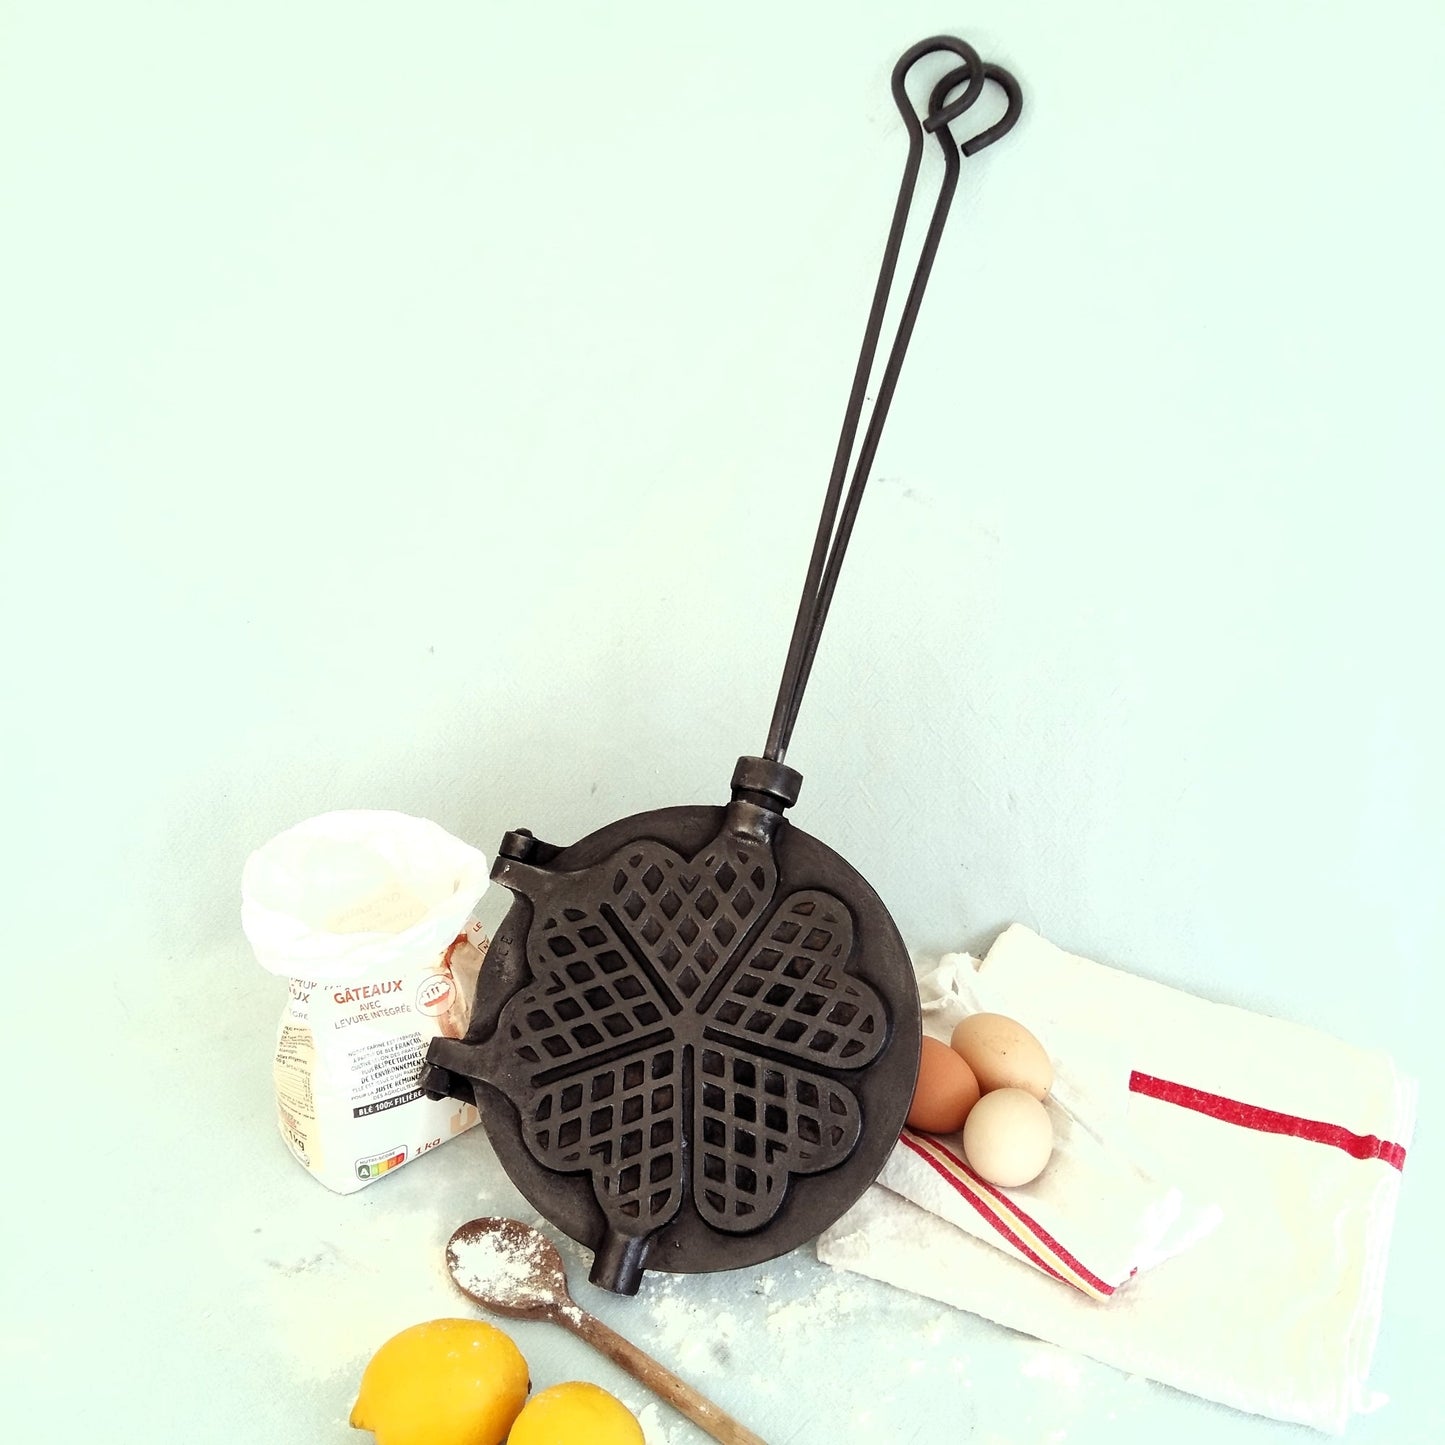  Antique Cast Iron Waffle Maker from Tiggy & Pip. €159.00 with FREE worldwide shipping.